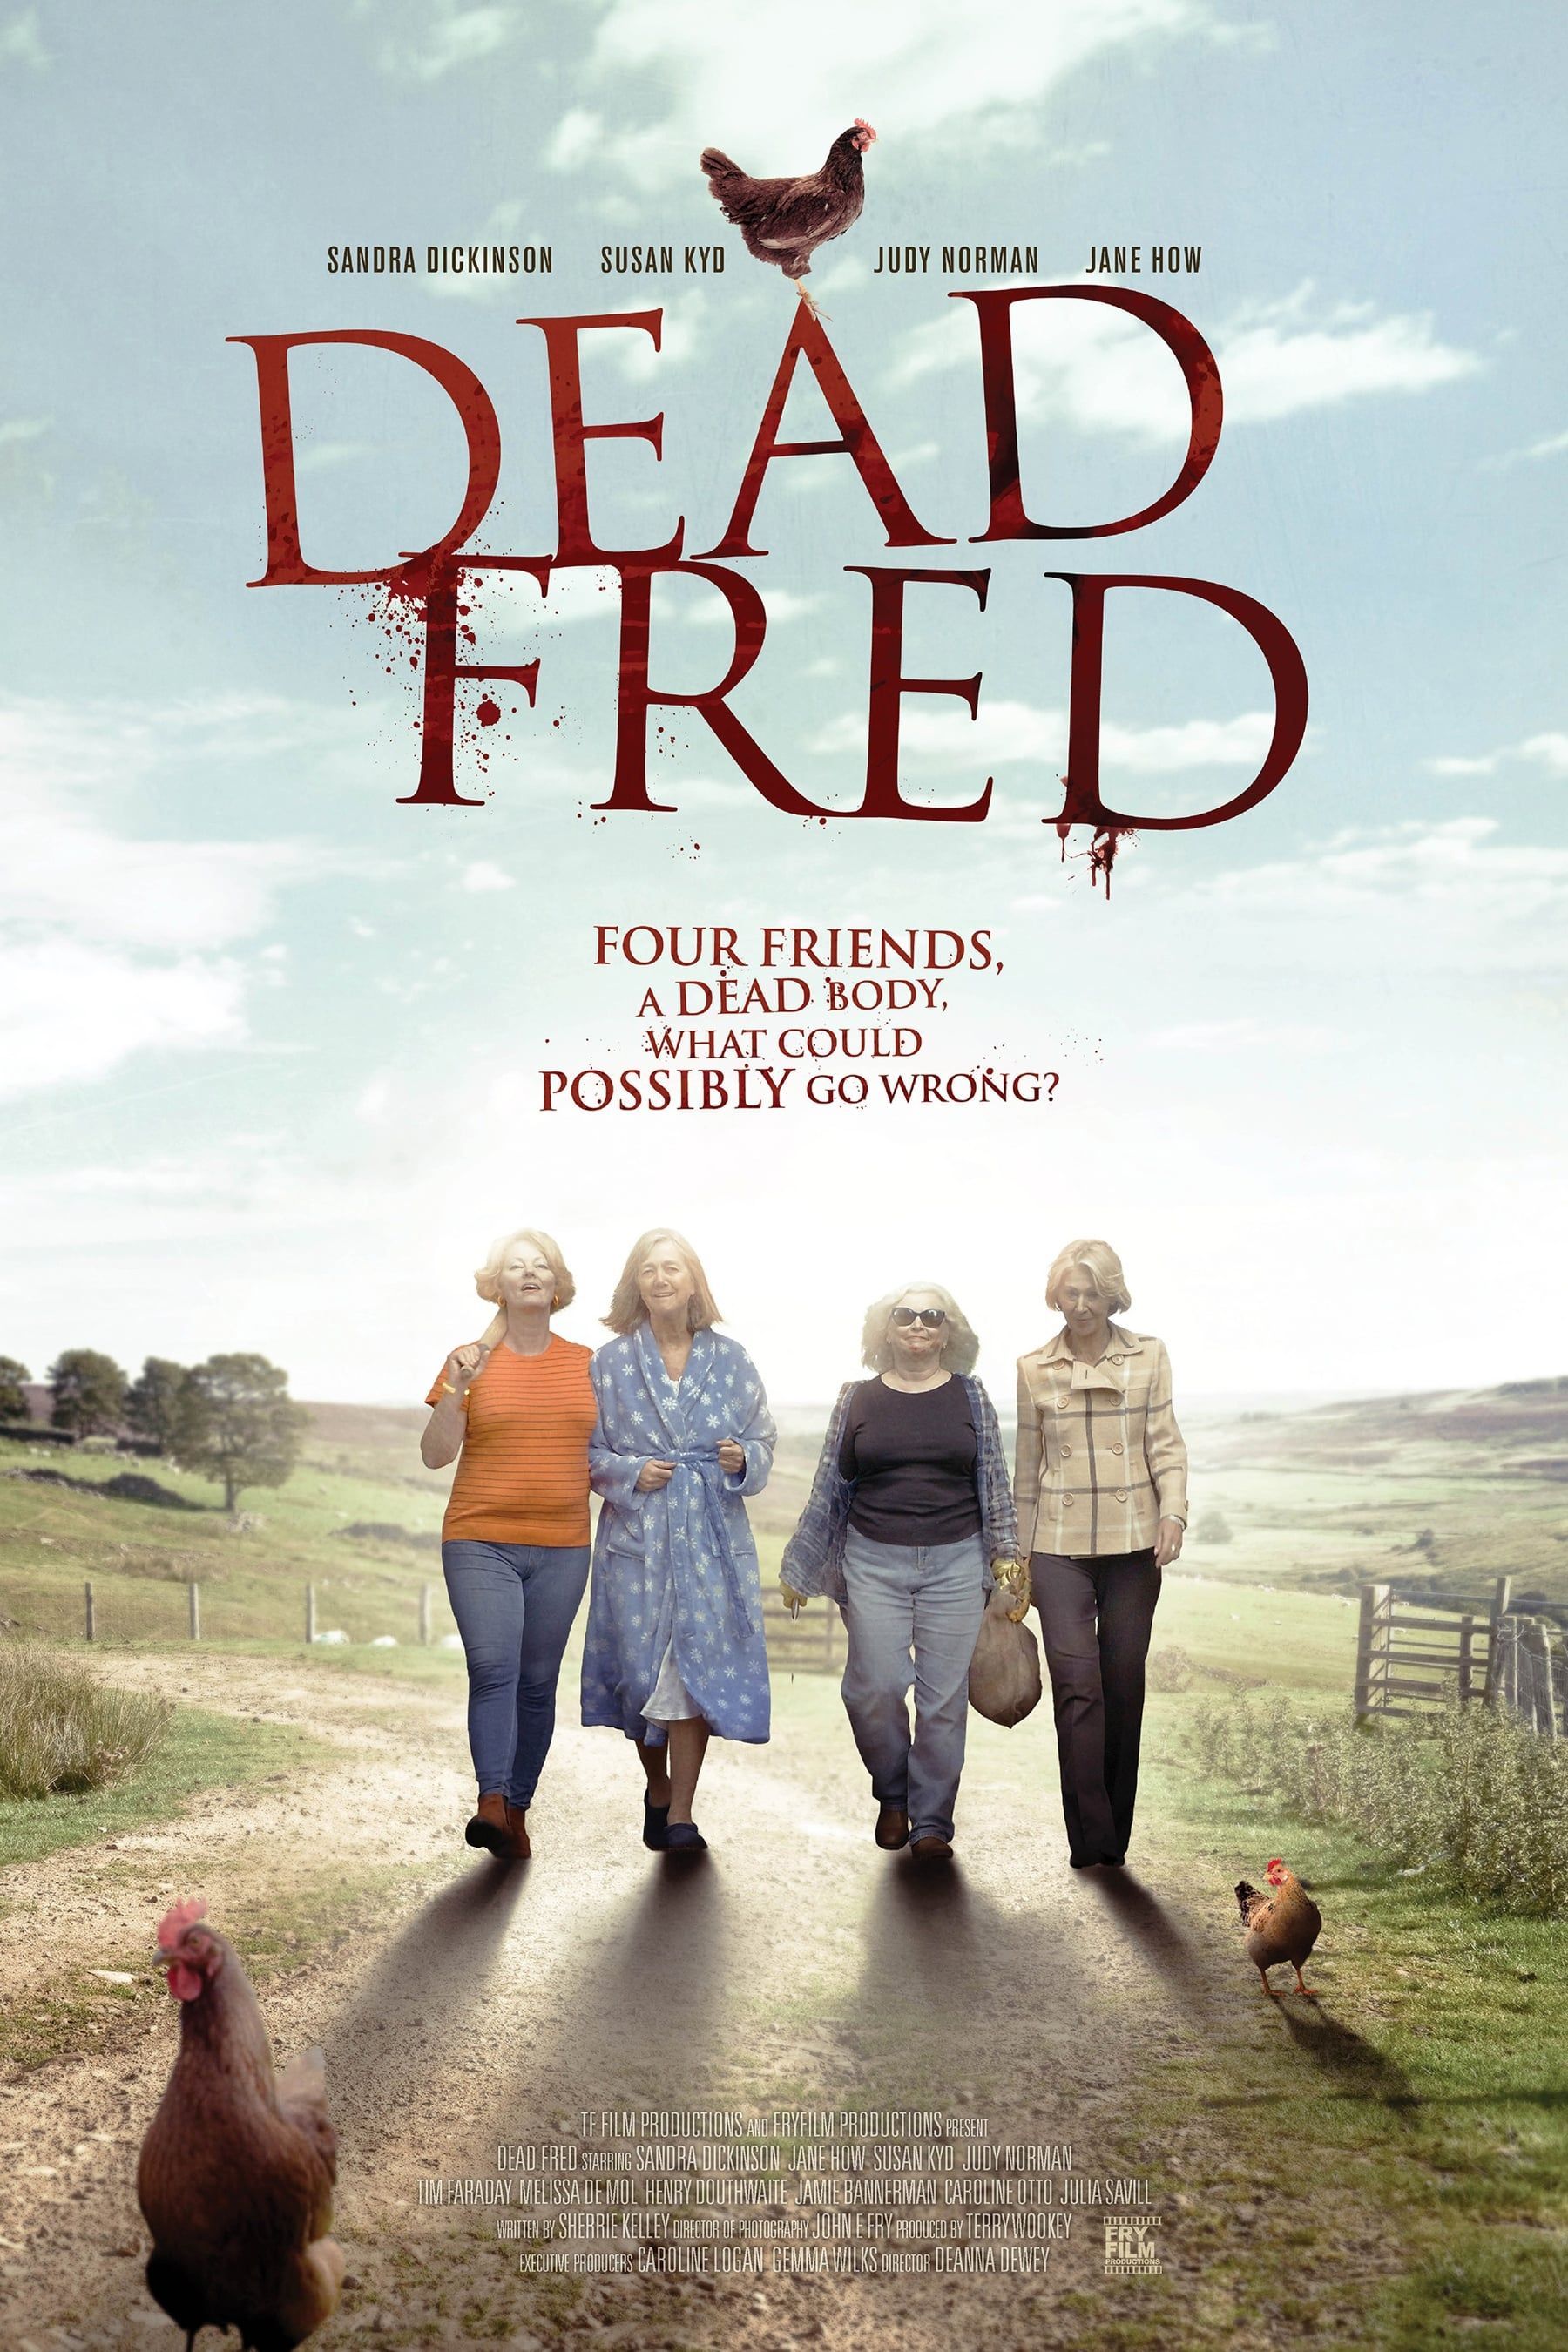 Best of Fred the movie online free